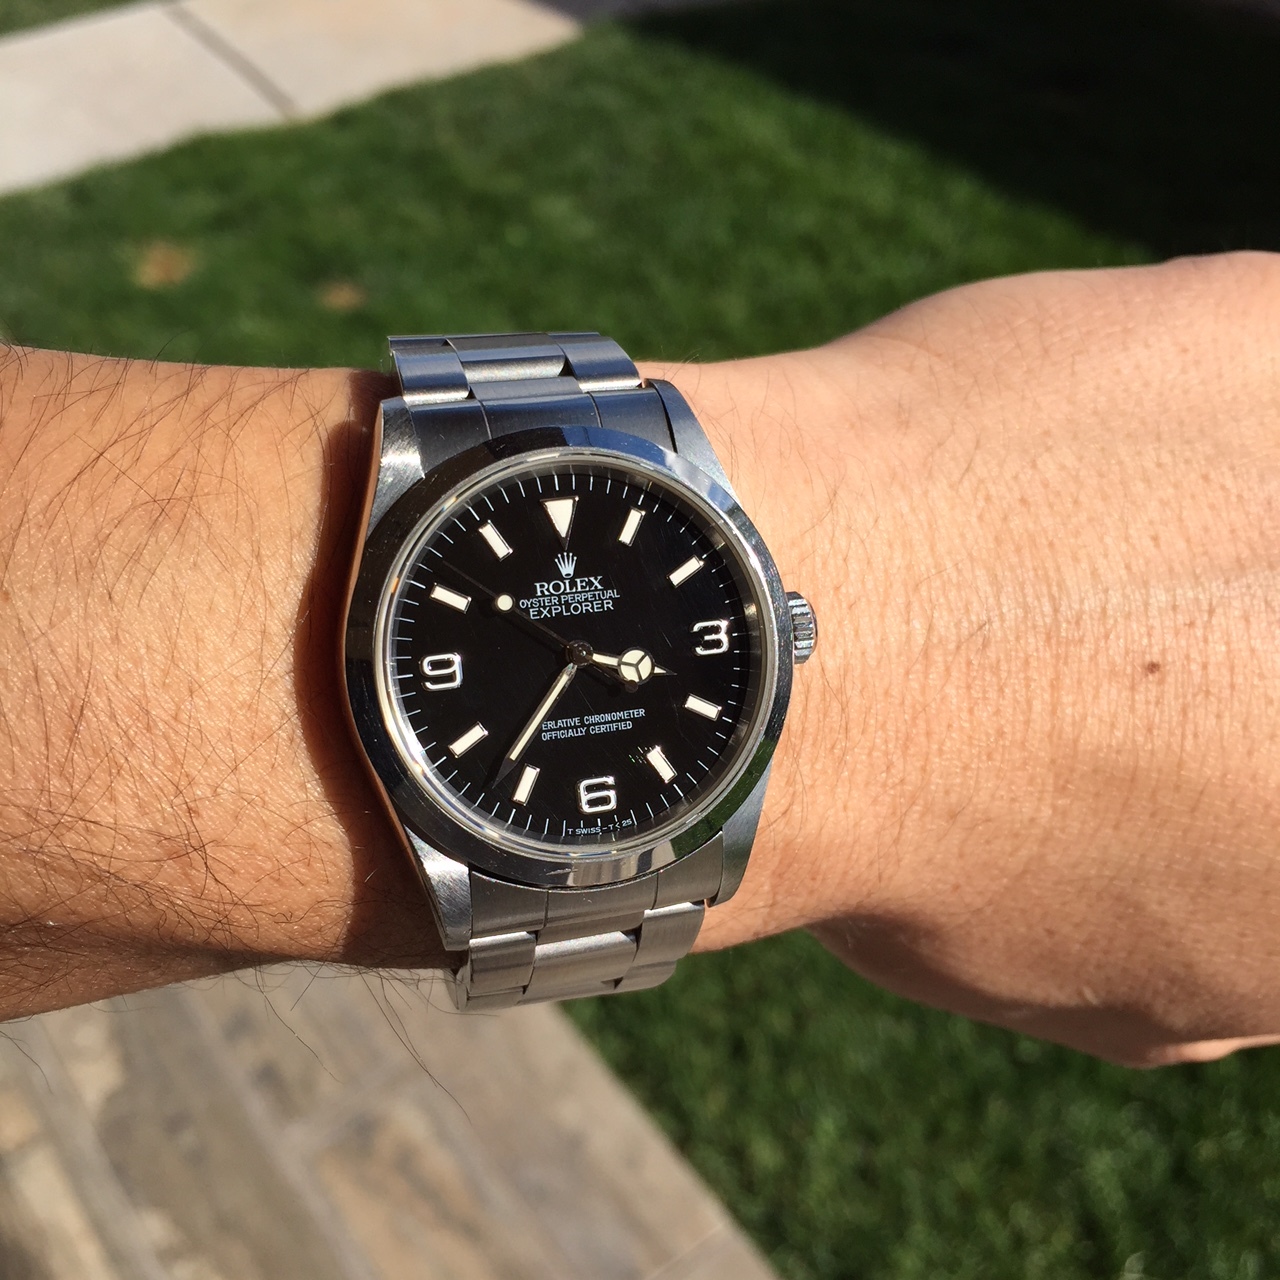 Falling in love with the Rolex Explorer 